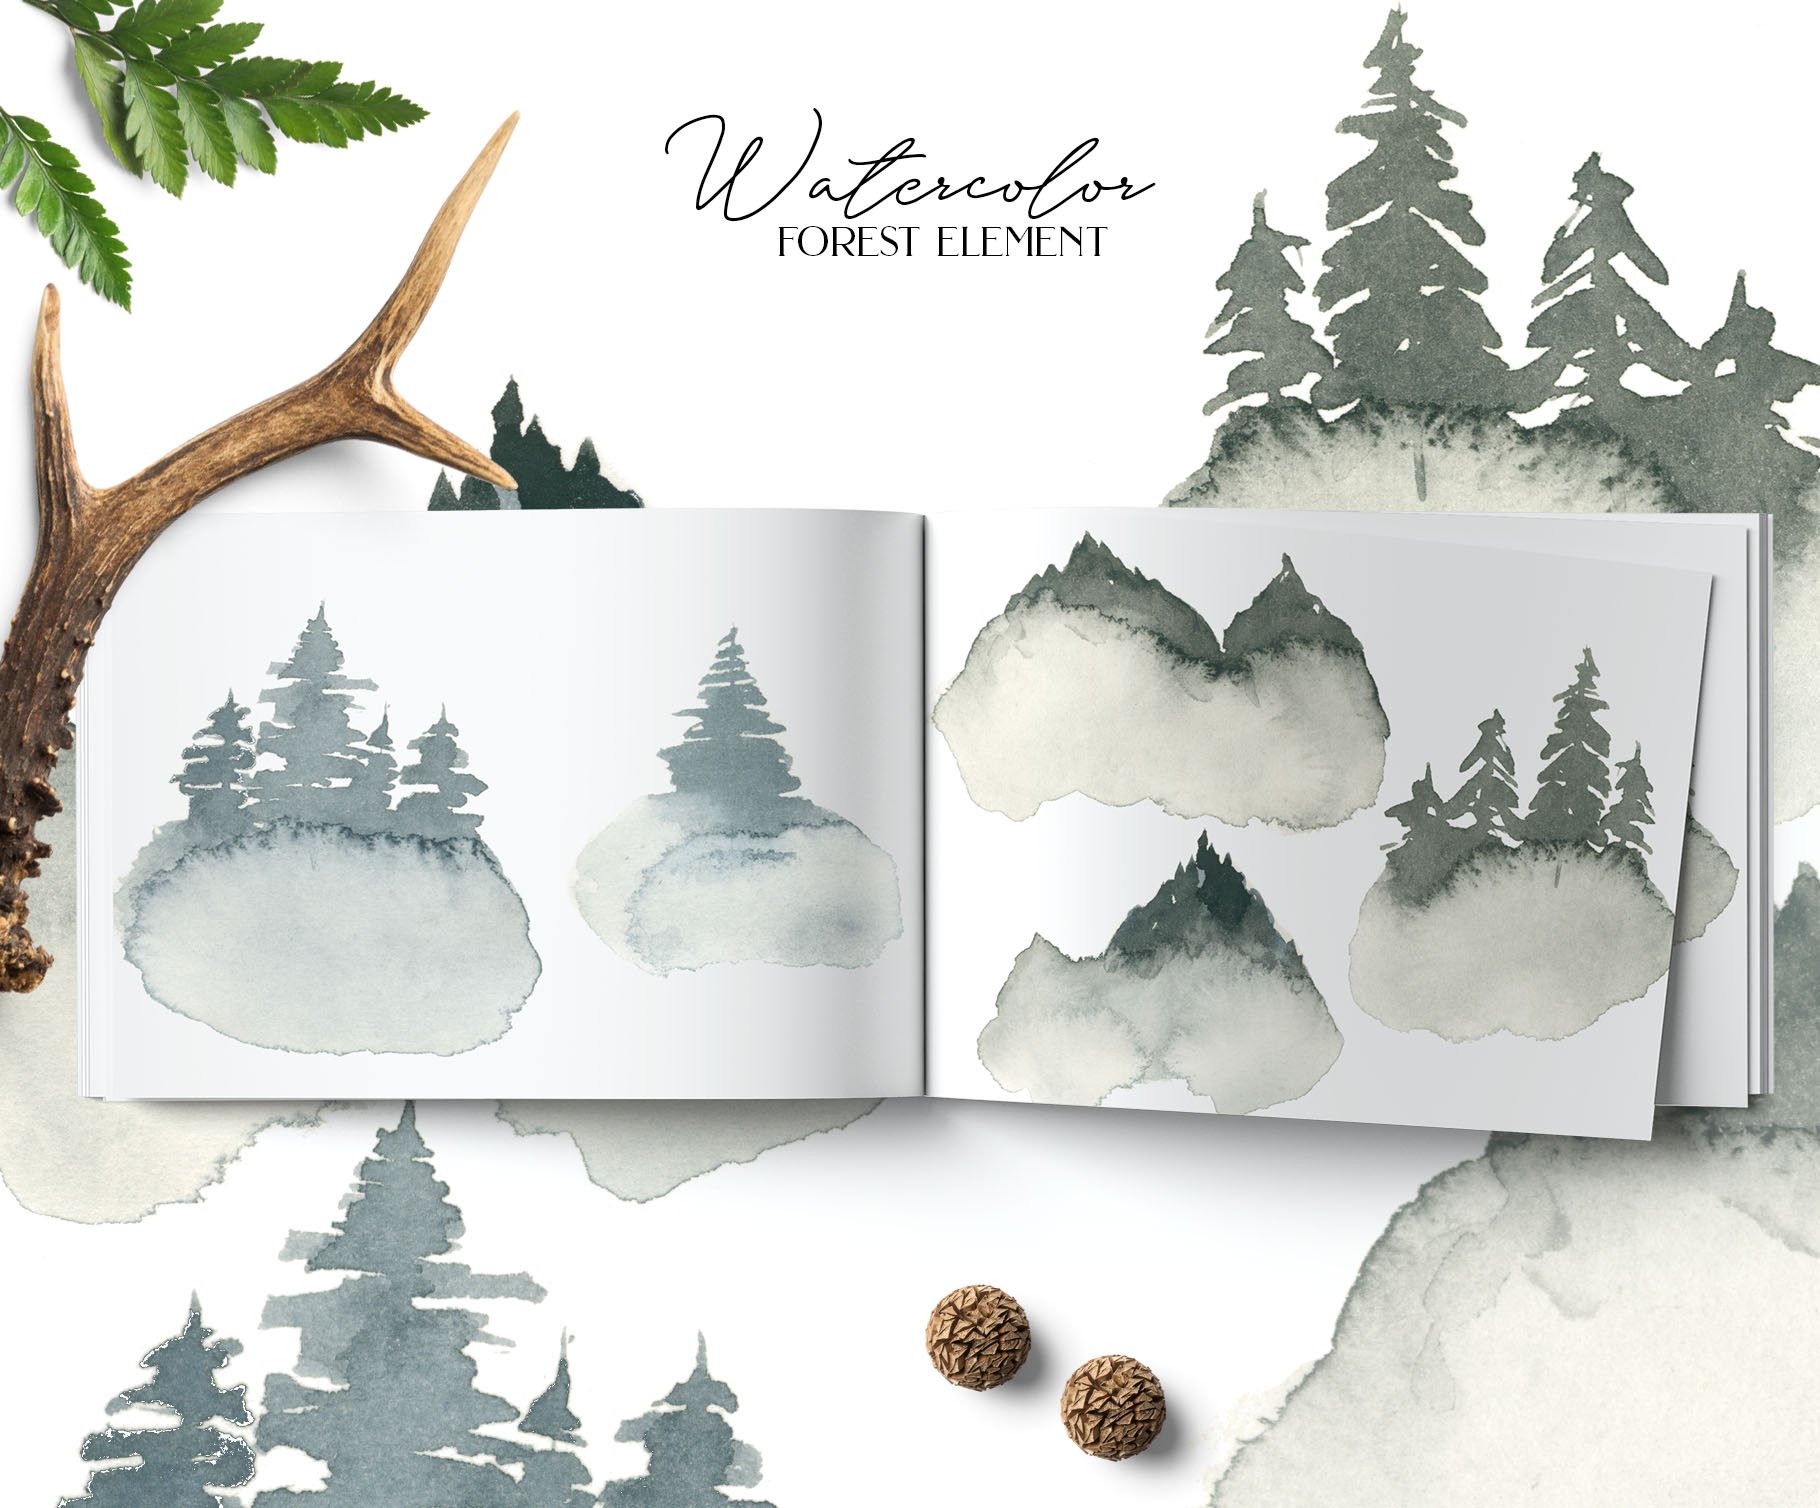 Coniferous Forest Collection